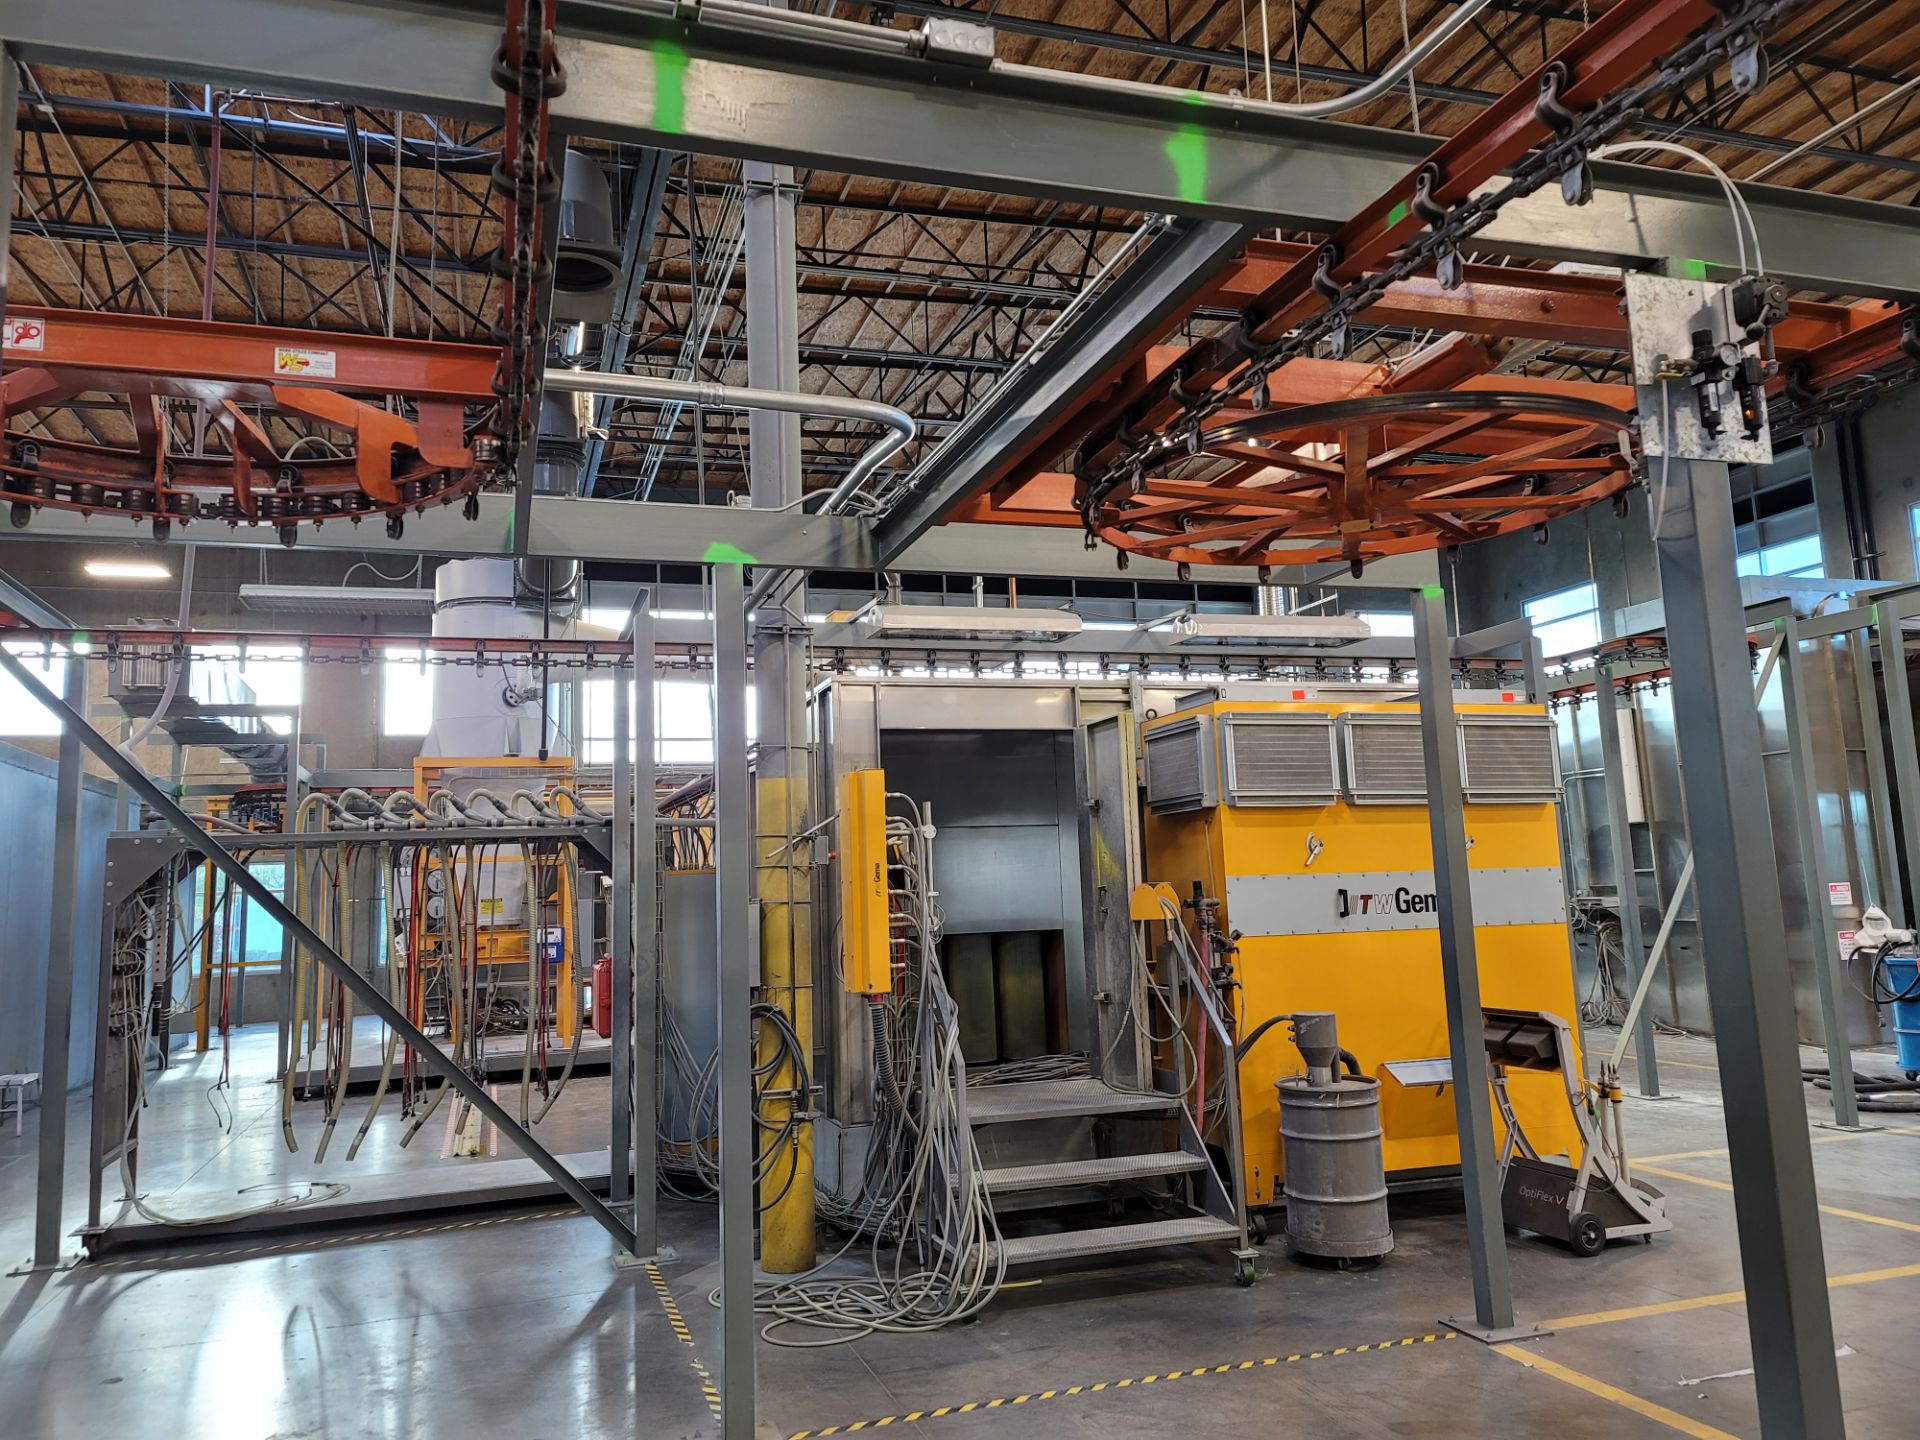 WEBB-STYLES OVERHEAD CONVEYOR SYSTEM FOR THE GEMA POWDER COATING LINE (PHOTOS SHOW BEFORE AND - Image 9 of 12